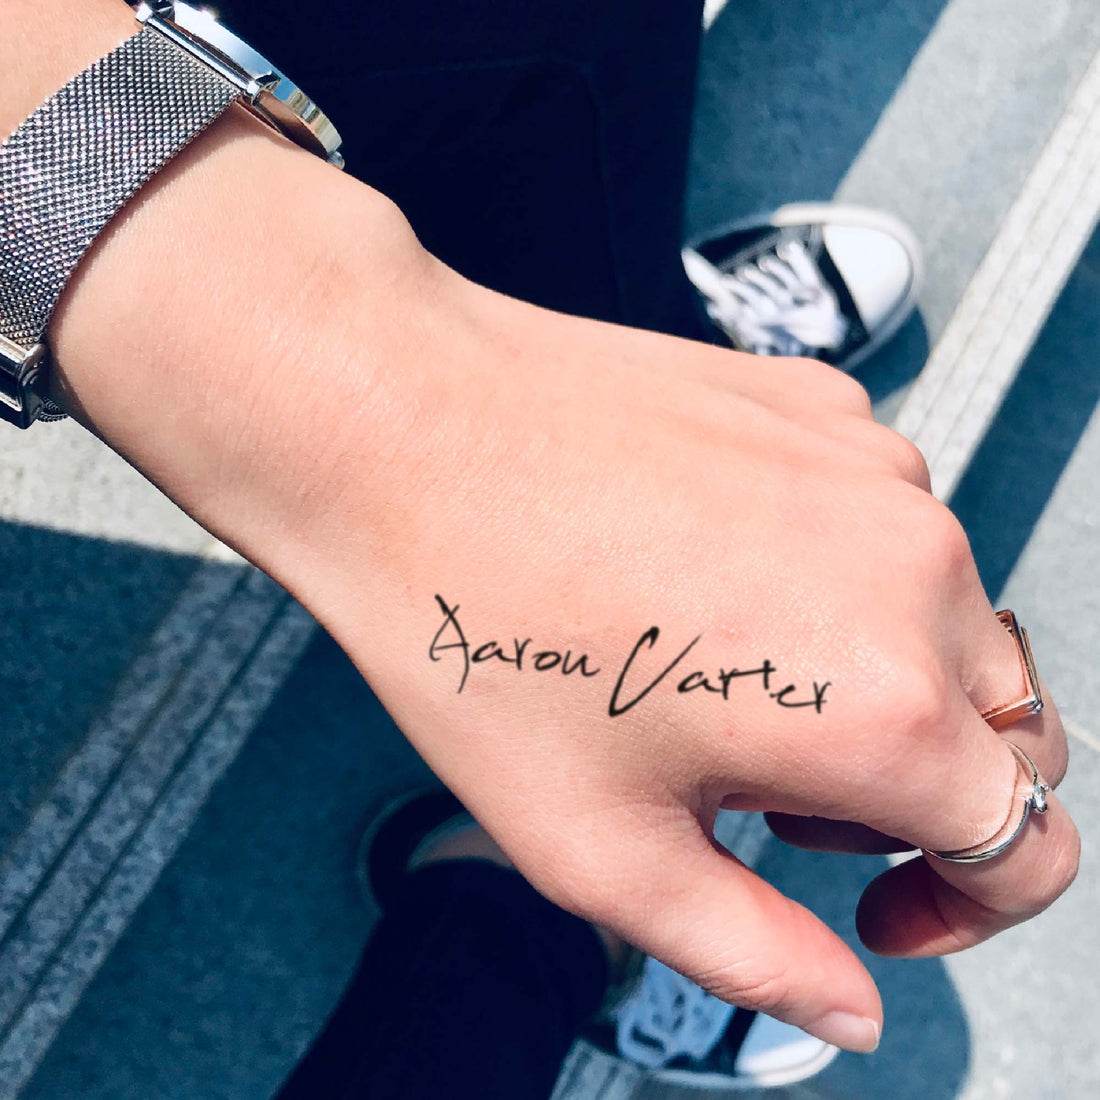 Aaron Carter custom temporary tattoo sticker design idea inspiration meanings removal arm wrist hand words font name signature calligraphy lyrics tour concert outfits merch accessory gift souvenir costumes wear dress up code